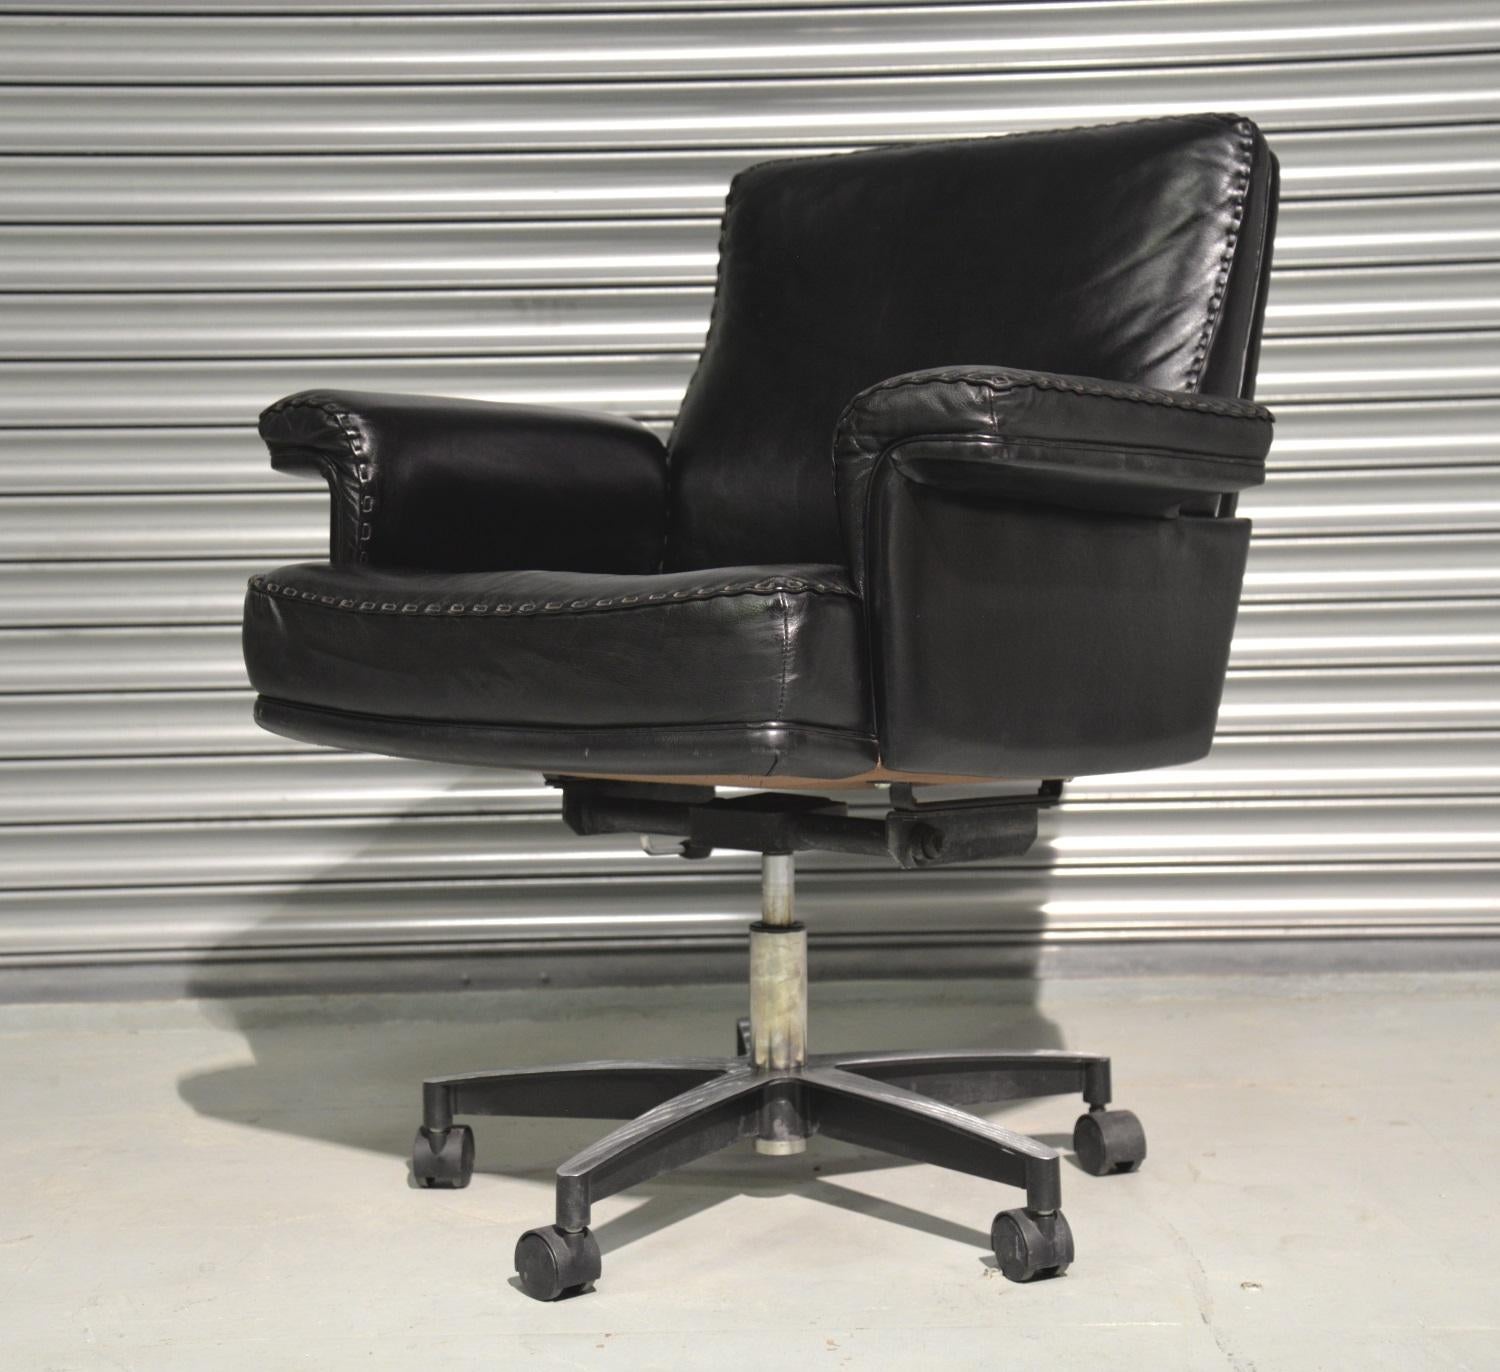 Discounted airfreight for our US and International customers (from 2 weeks door to door)

We are delighted to bring to you an extremely rare vintage De Sede DS 35 armchair on casters. Built to incredibly high standards by De Sede craftsman in